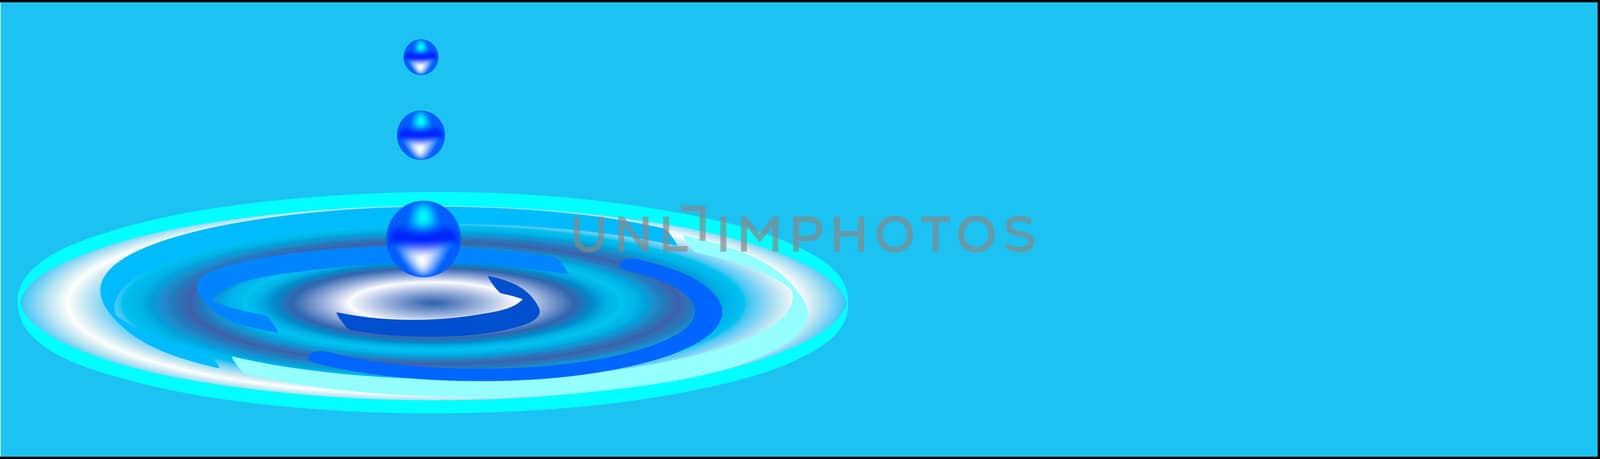 water ripples banner by hospitalera